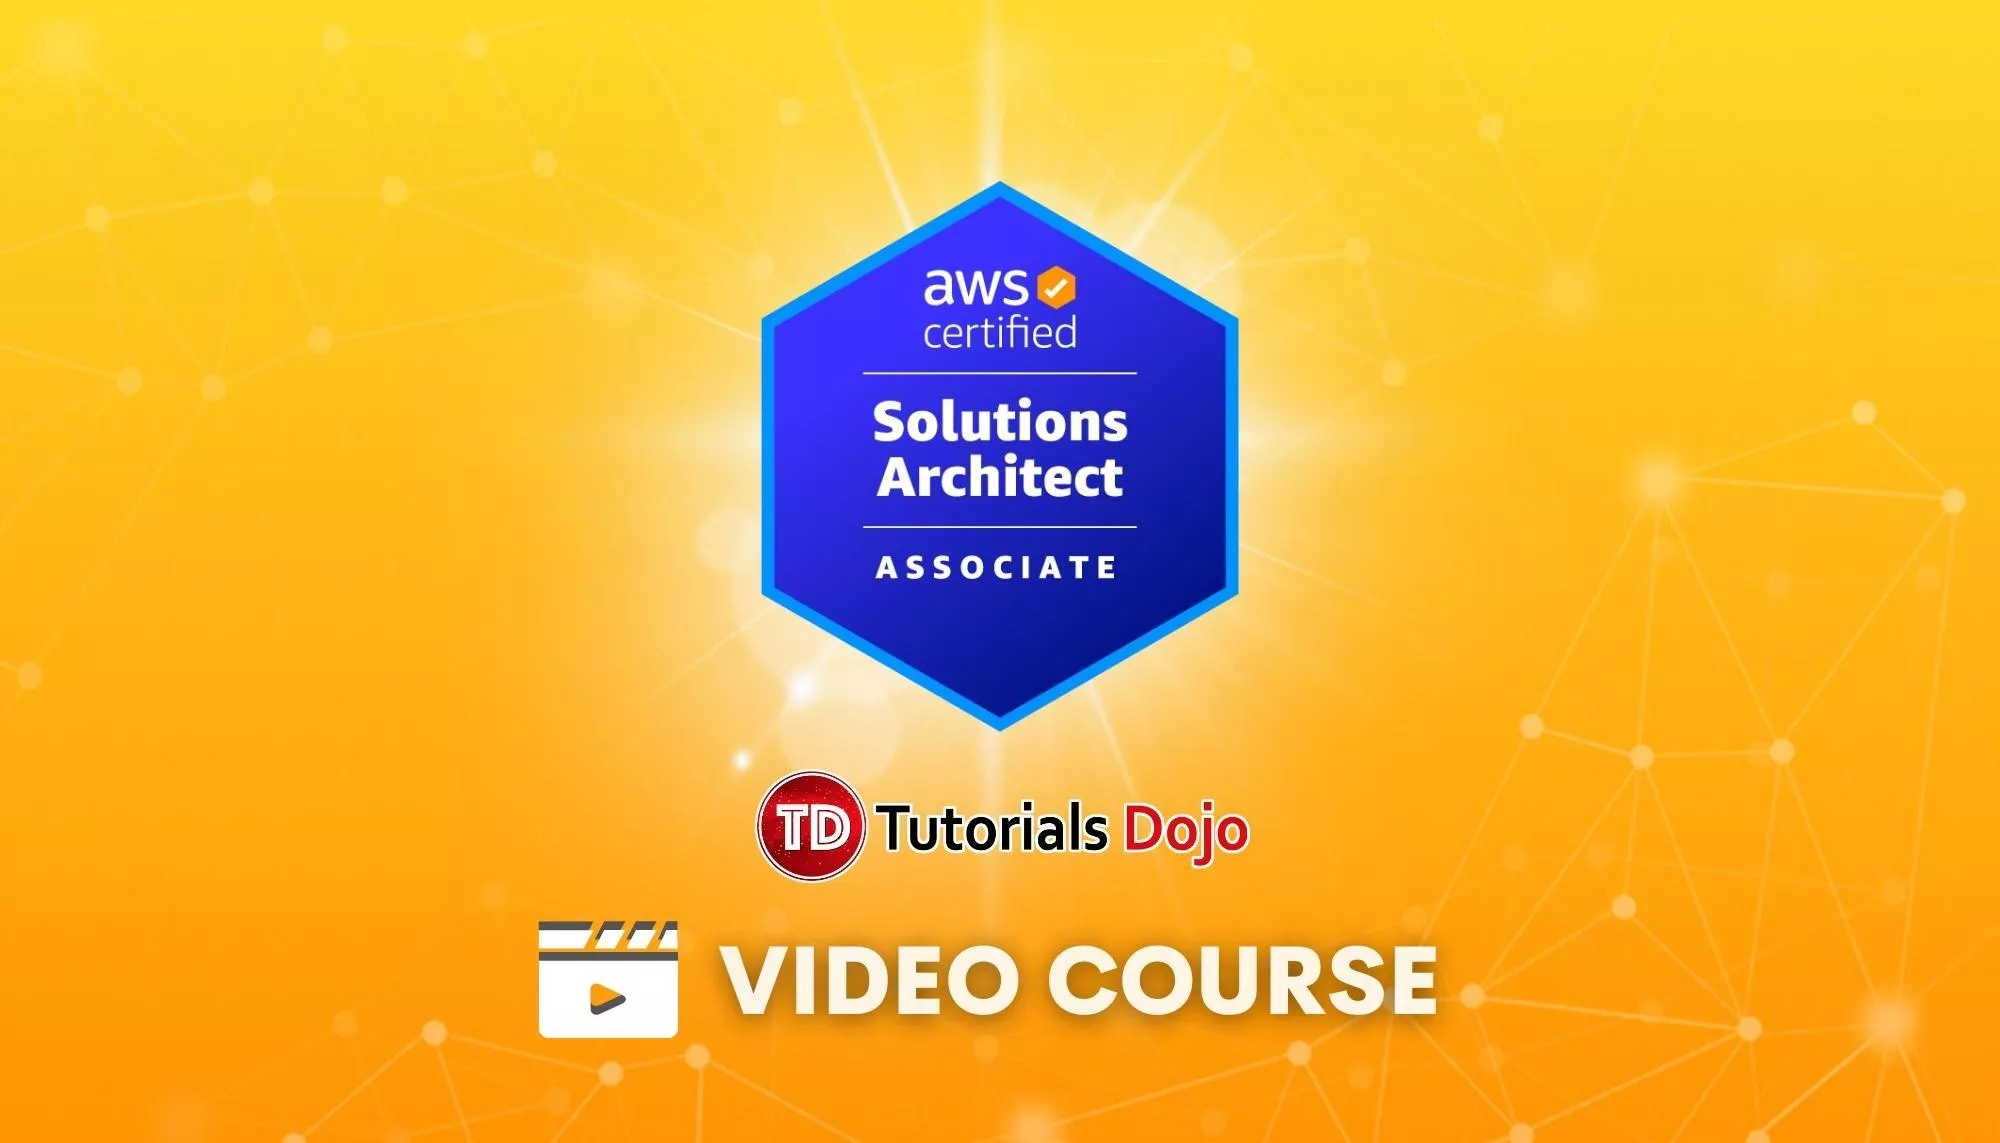 New AWS Cloud Practitioner Video Course Release and other Video Courses Price Drop